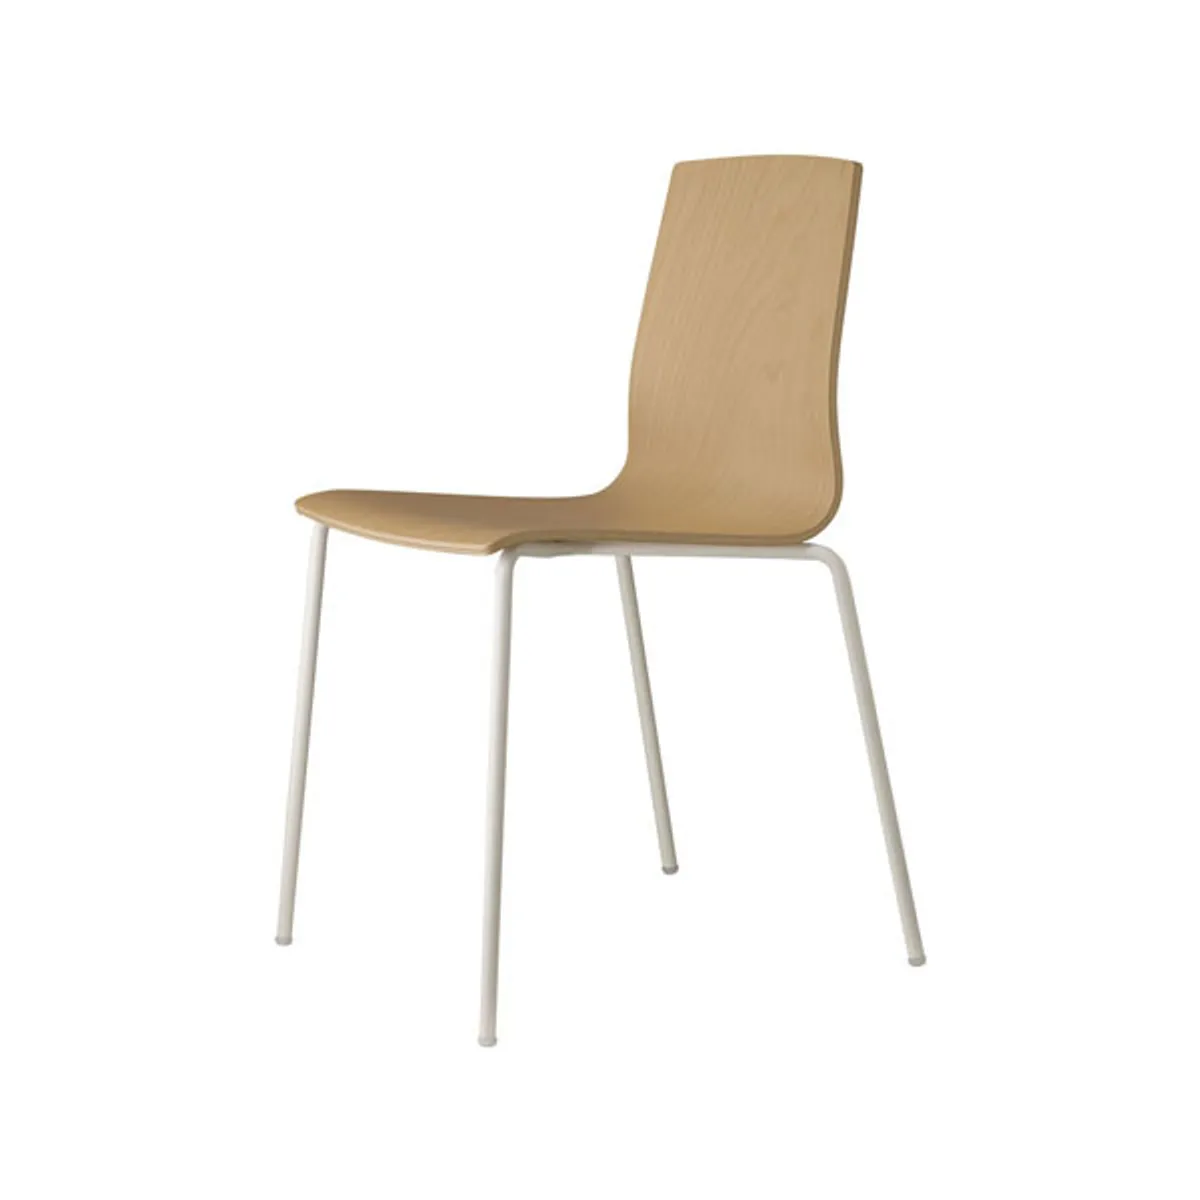 Evie 2 metal side chair 2 Inside Out Contracts